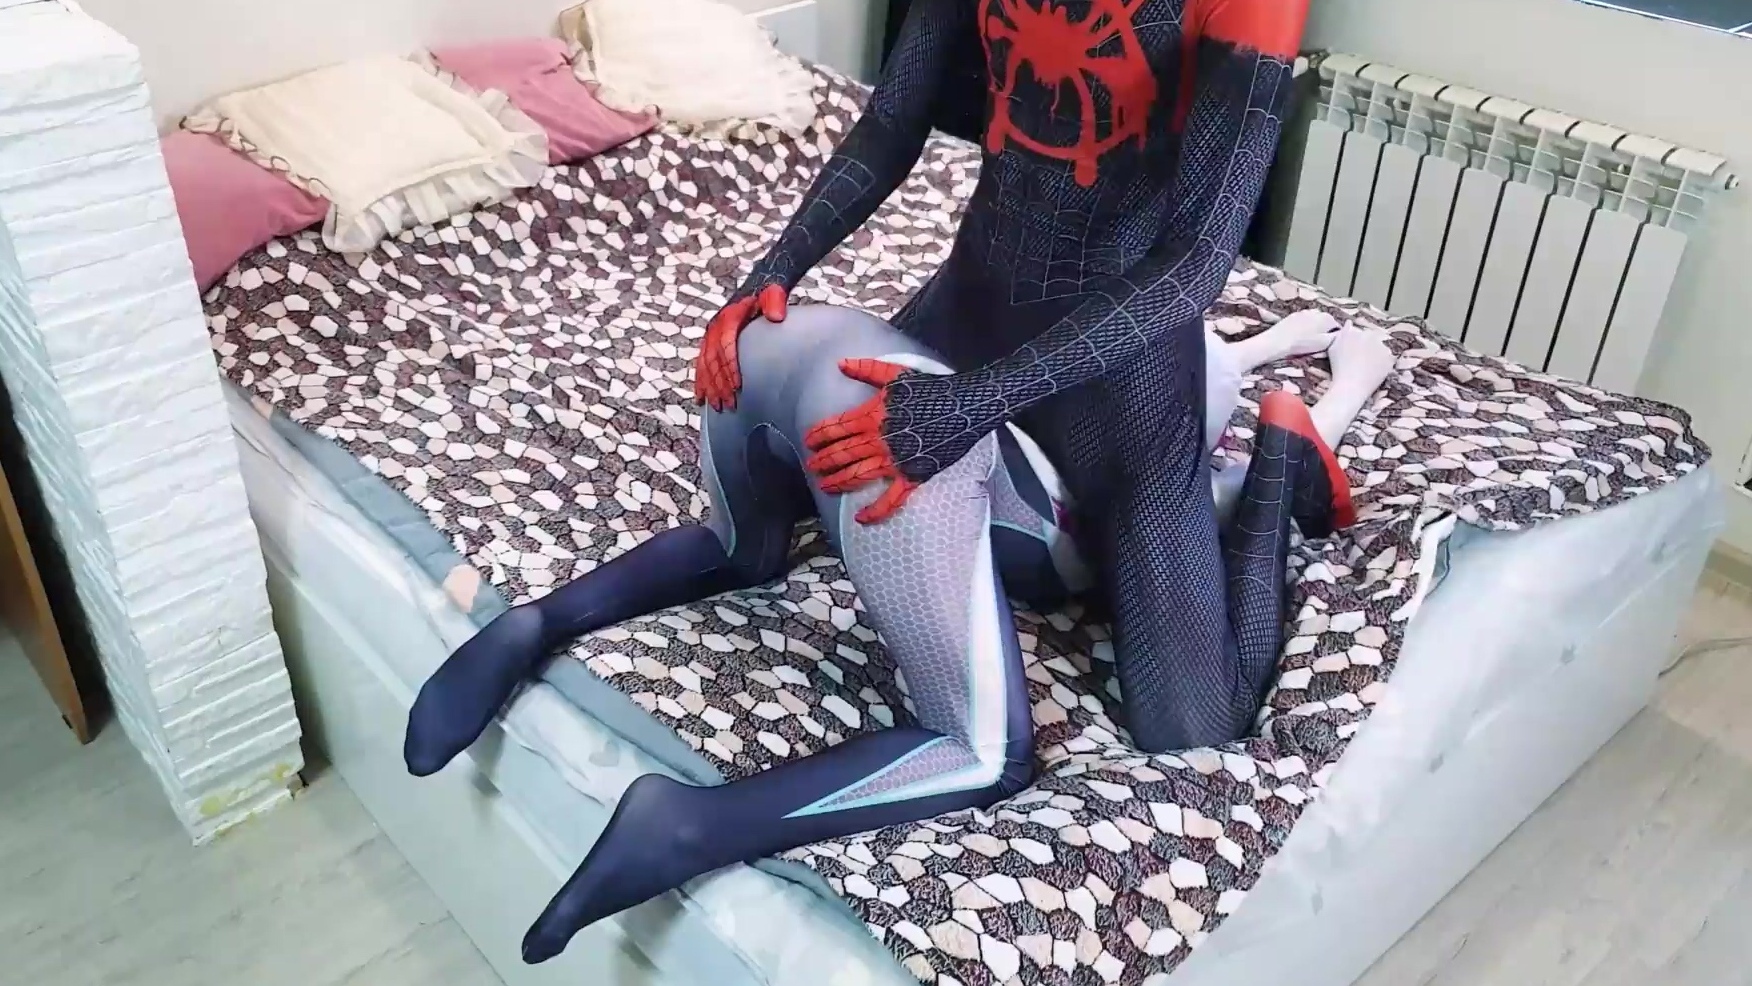 Gwen Stacy Xxx Porn - Peter Parker shoots his web at Gwen Stacy's mouth